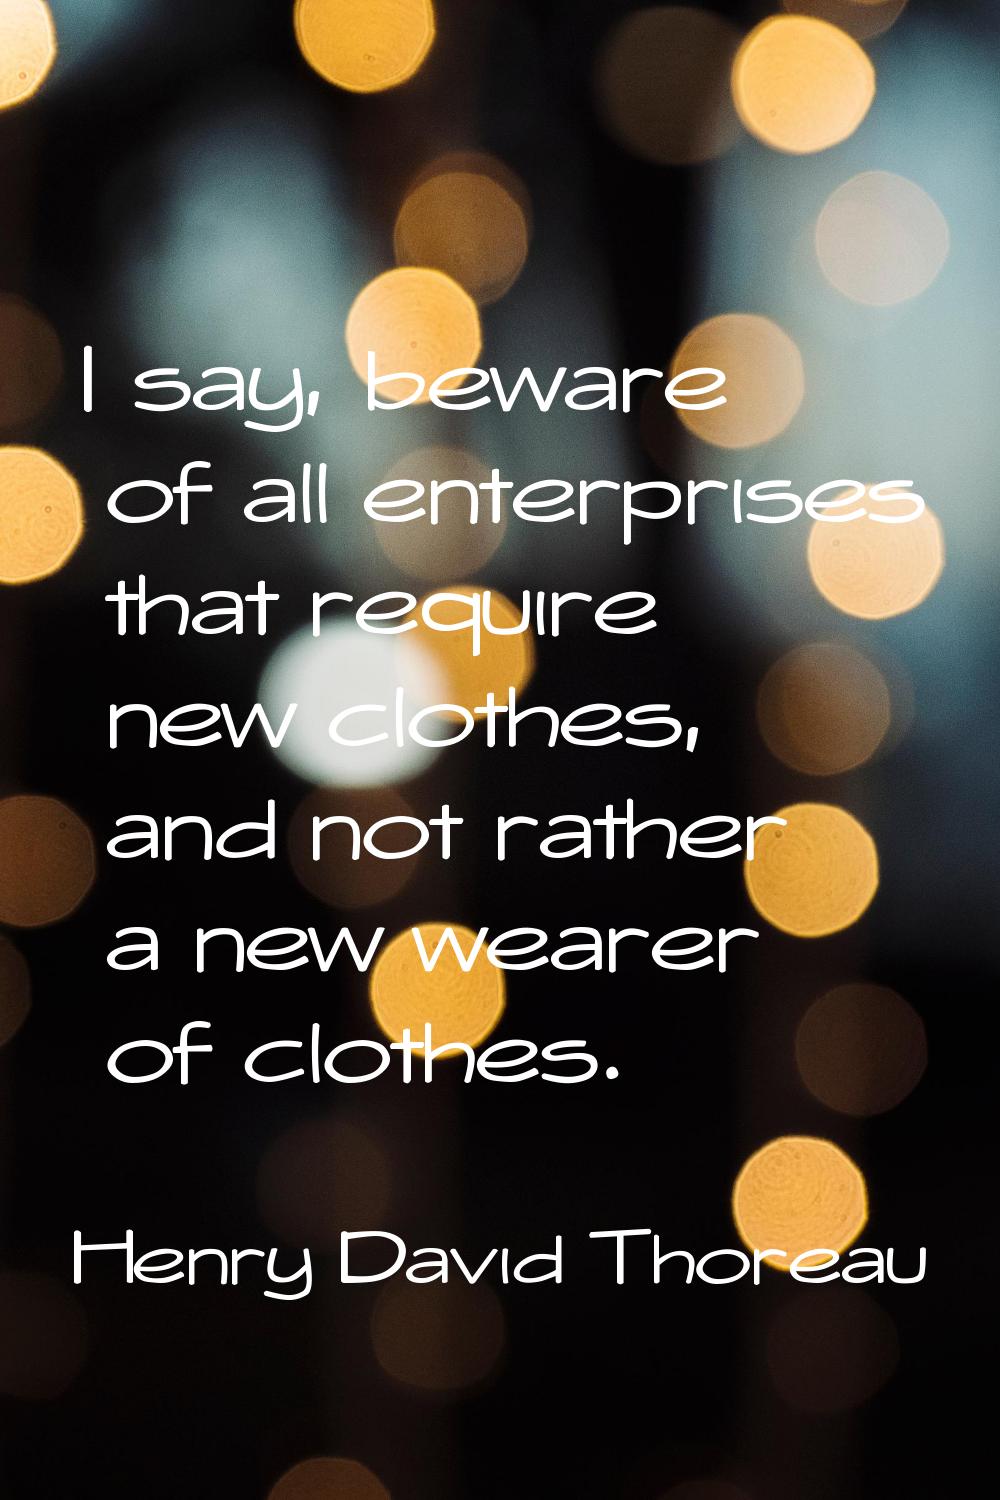 I say, beware of all enterprises that require new clothes, and not rather a new wearer of clothes.